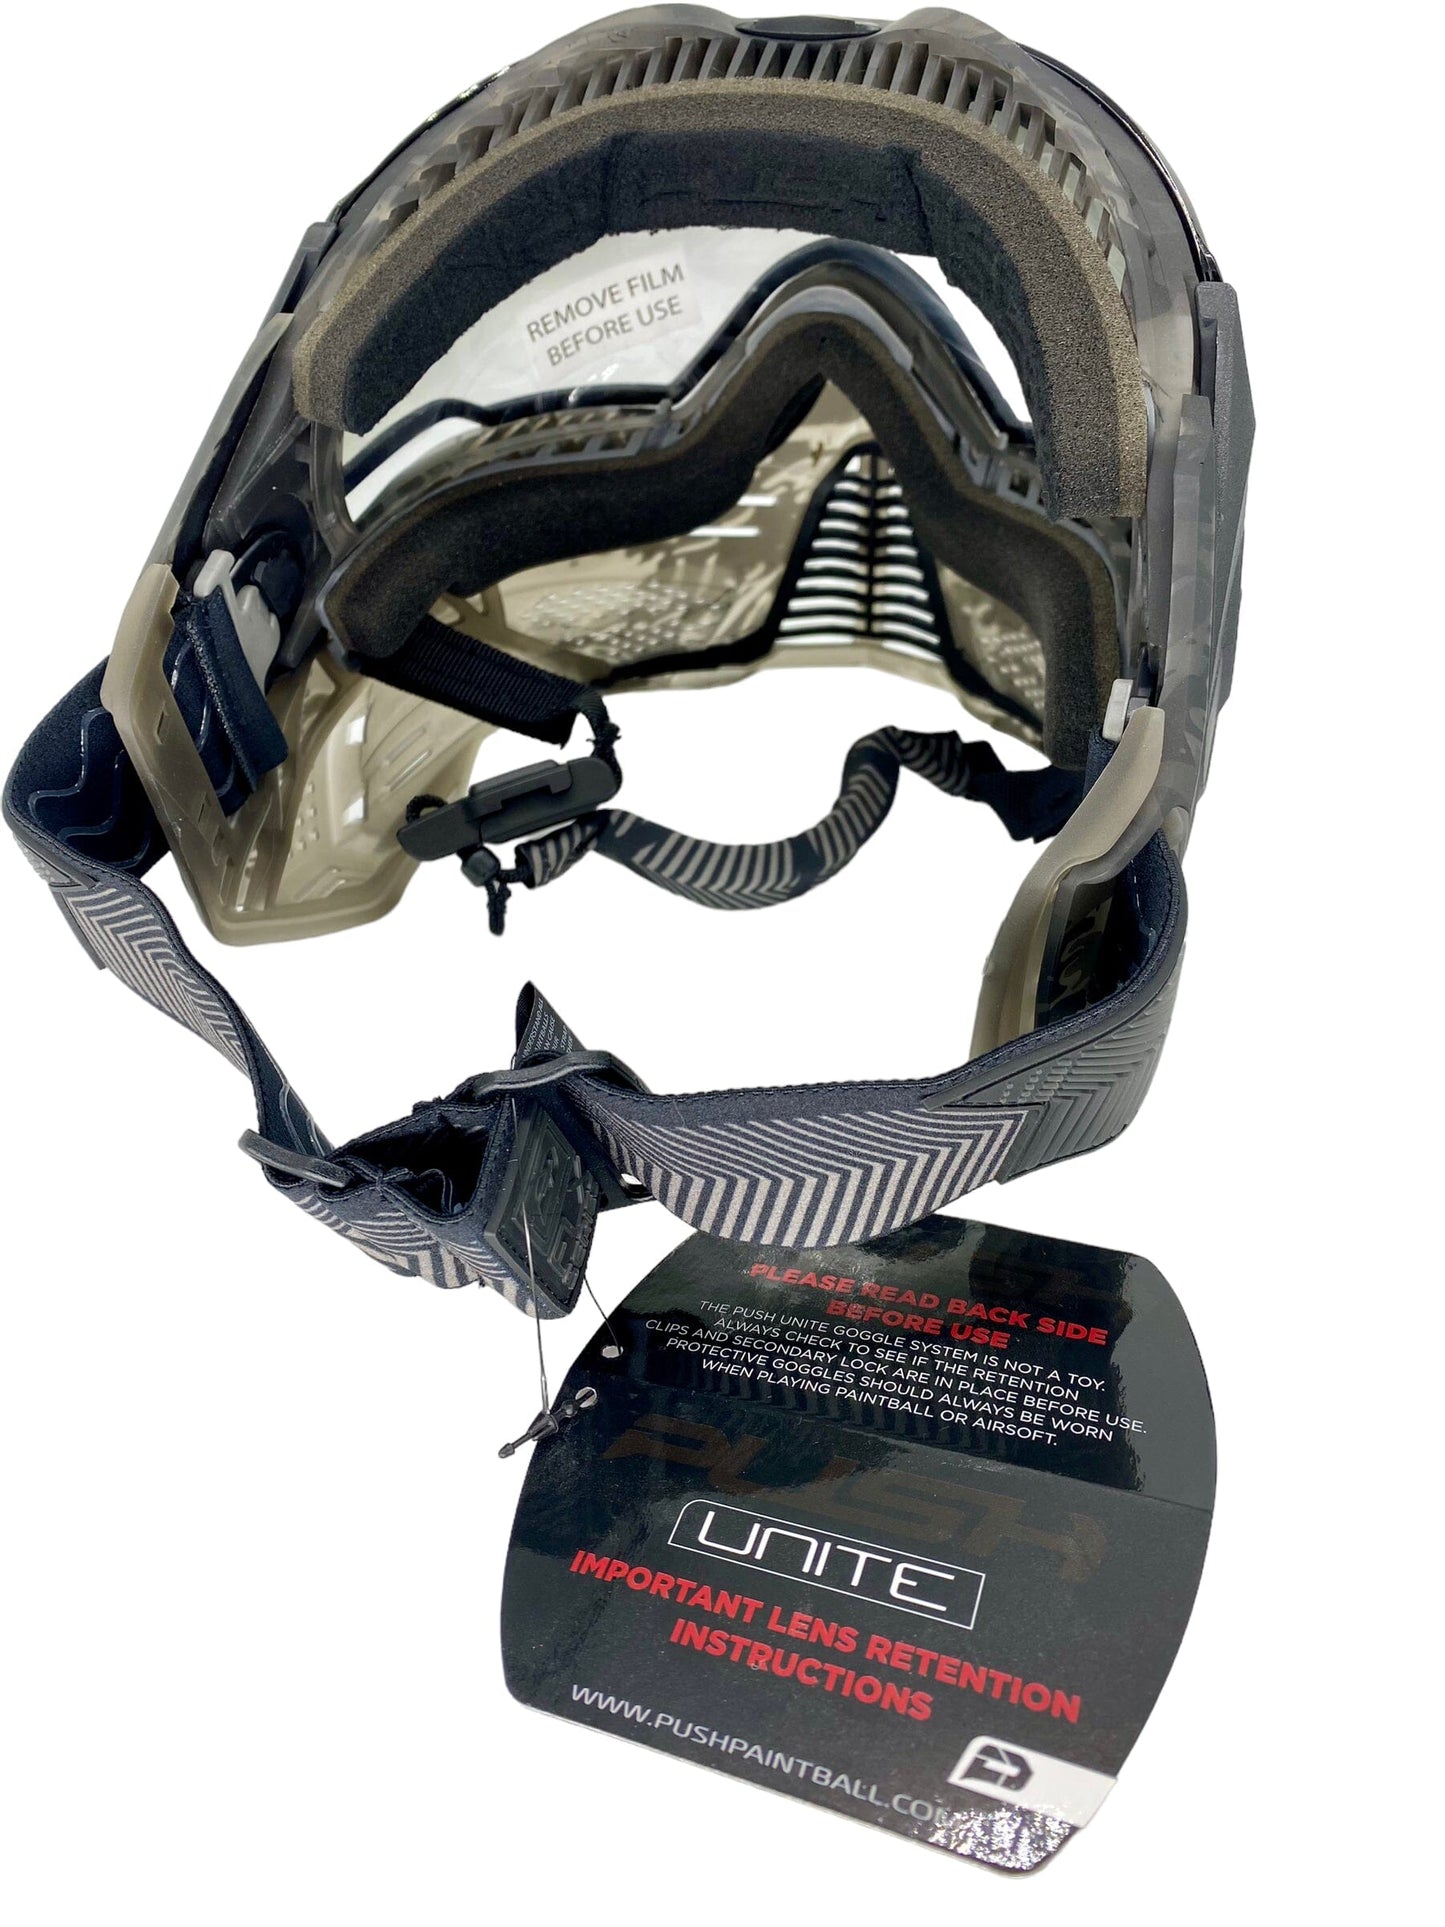 Used Brand New Push Unite Paintball Mask CPXBrosPaintball 